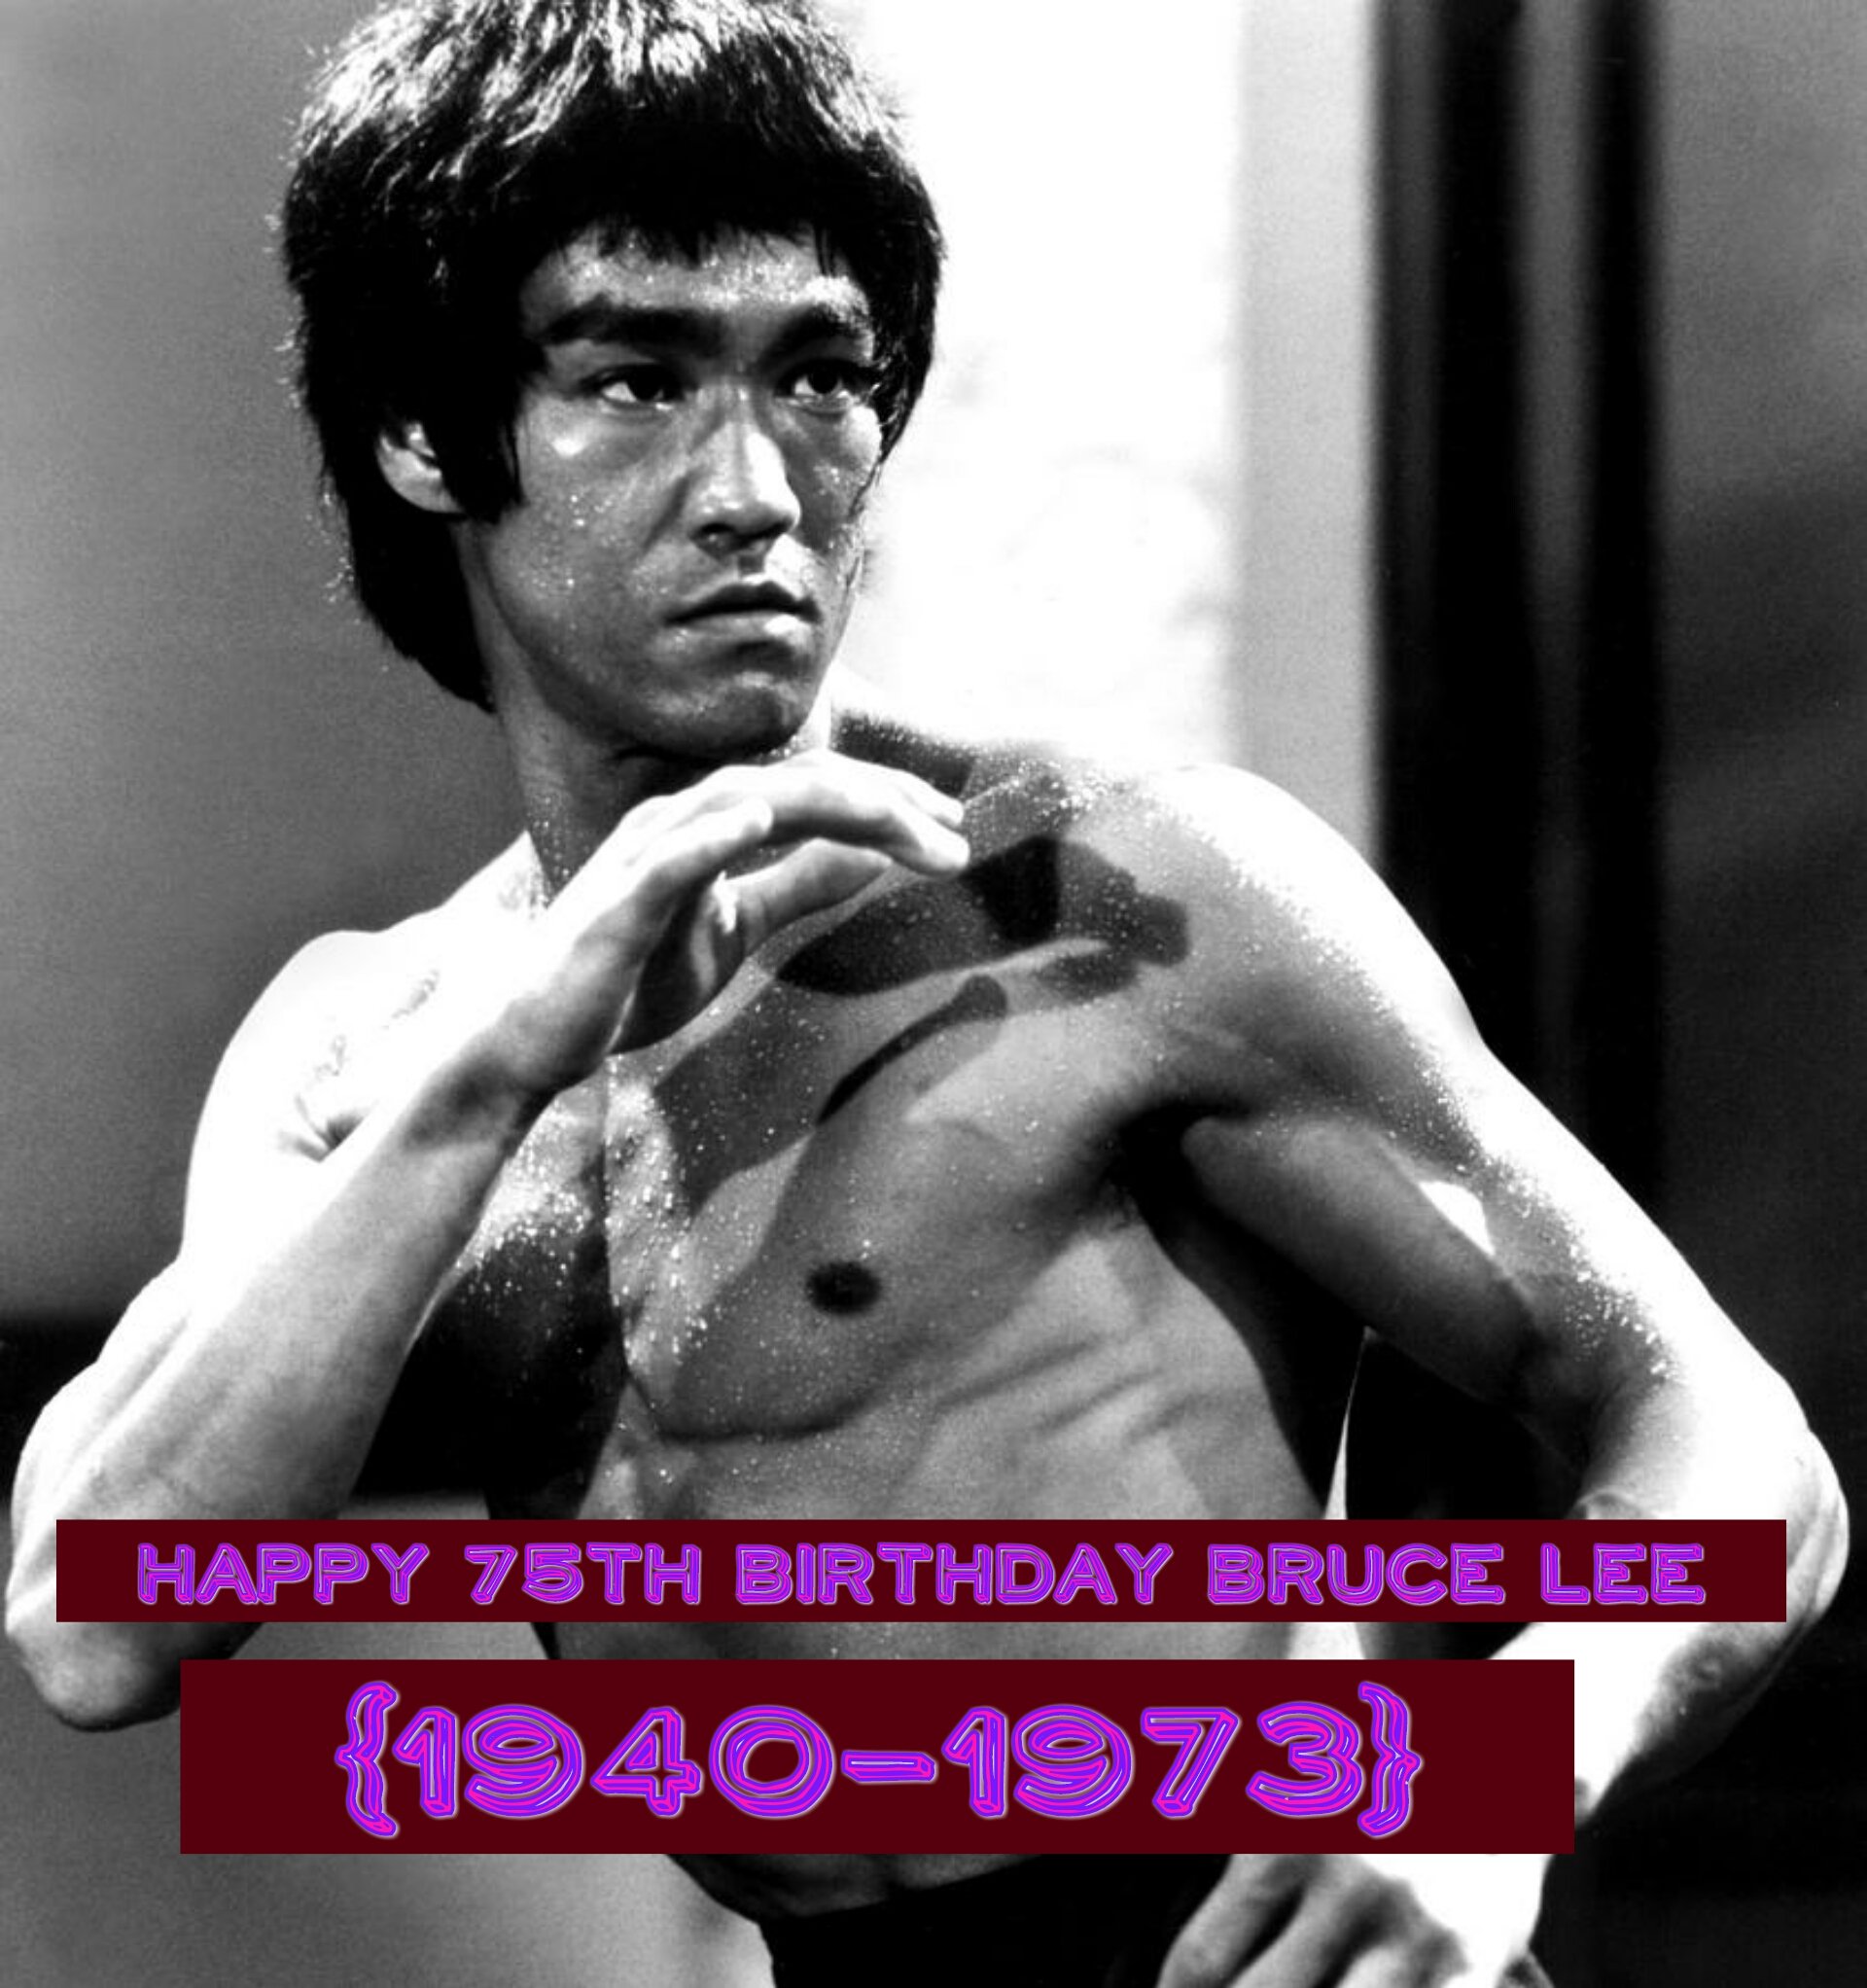 Happy 75th Birthday, Bruce Lee, Star of Enter the Dragon! May he RIP! 